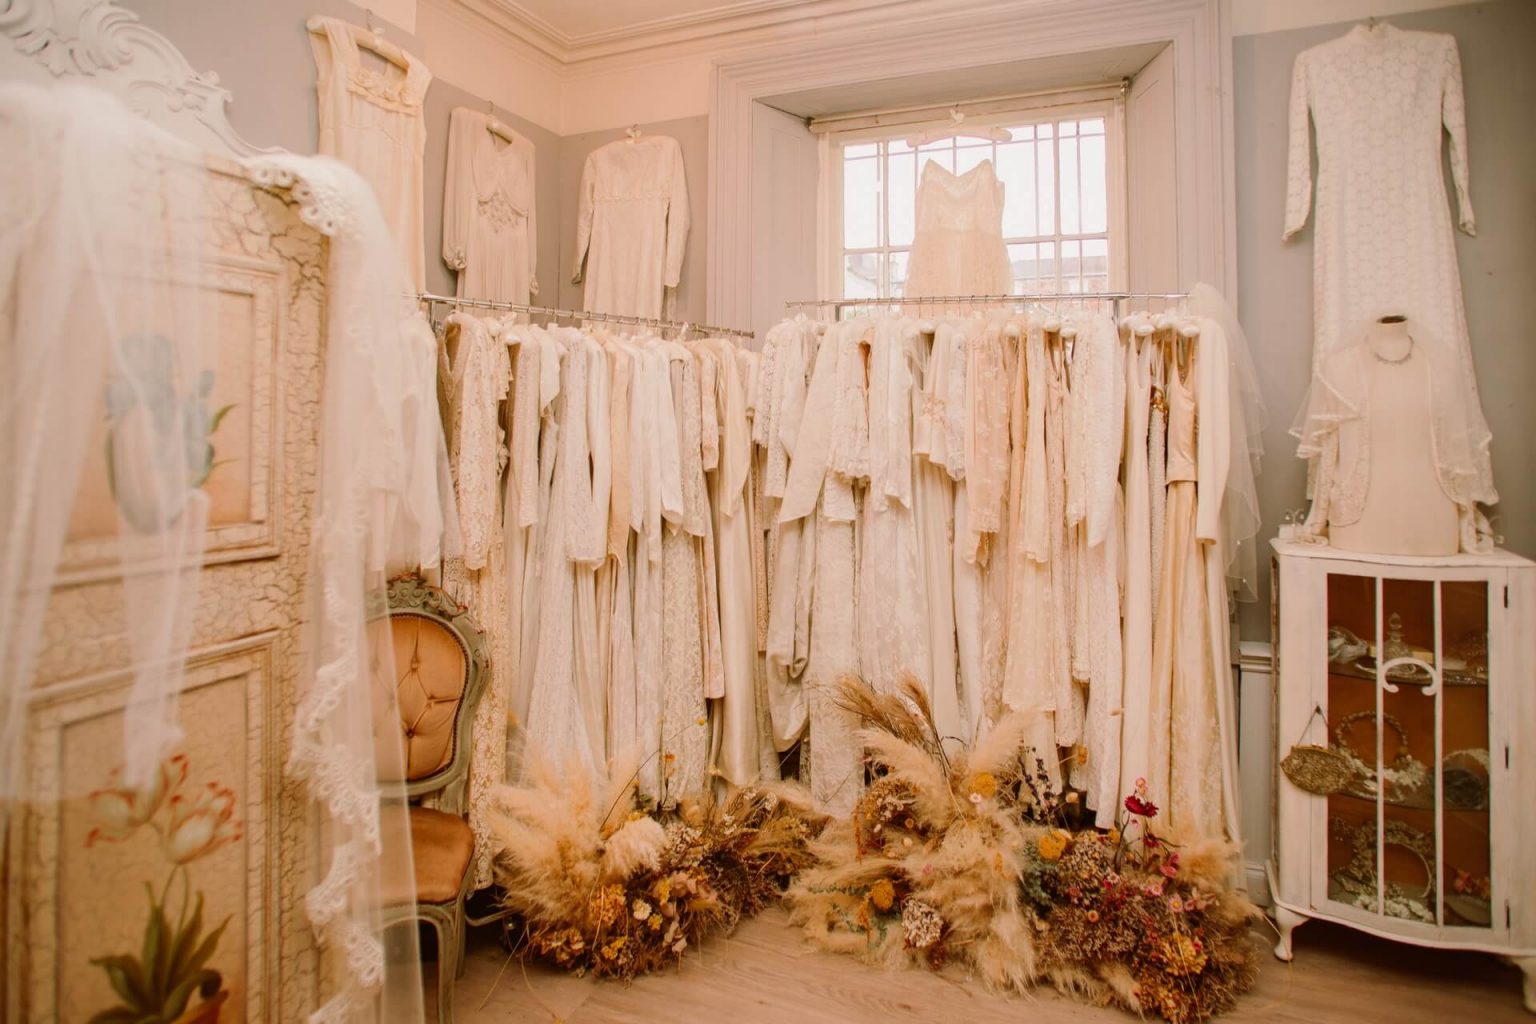 Interior shot of Ashwell & Co, with rails full of vintage wedding dresses and beautiful dried flowers